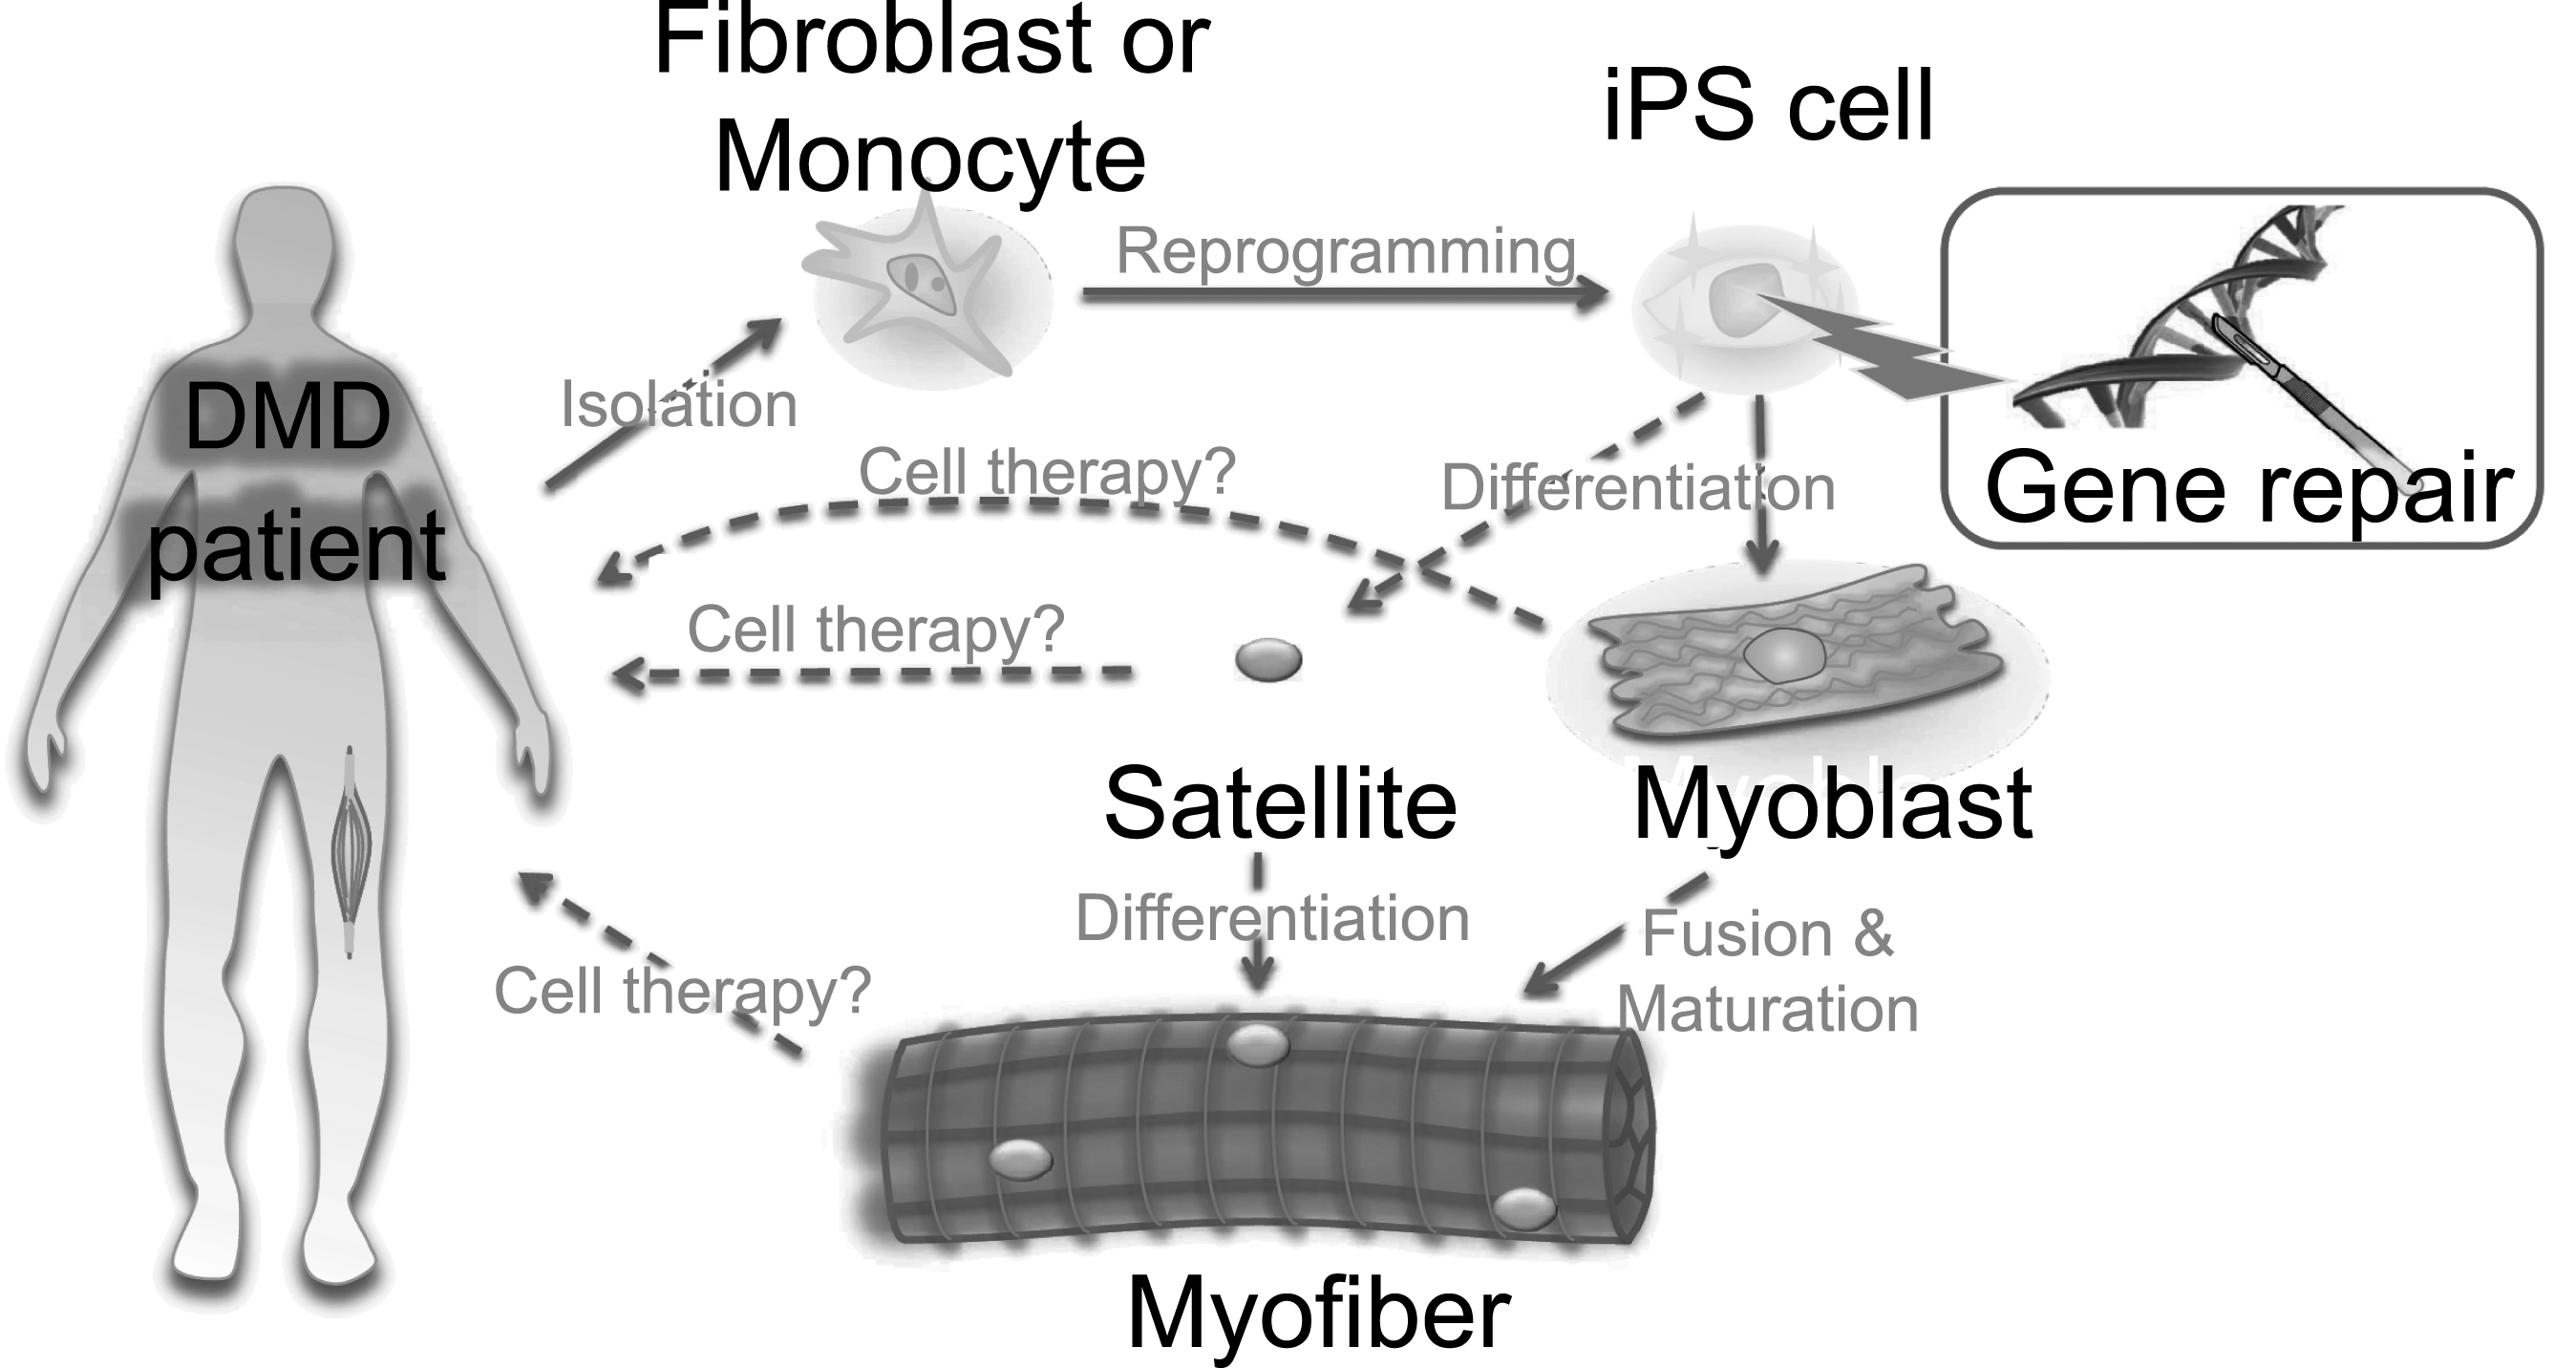 Ex vivo gene therapy approaches using iPS cells. A scheme for iPS cell-mediated ex vivo gene therapy approaches for DMD. Skin fibroblasts or monocytes from peripheral blood are reprogrammed to iPS cells by transient expression of the Yamanaka factors. The dystrophin mutation can then be repaired using genome engineering technologies. Such corrected iPS cells can be further differentiated into myoblasts to form myofibers. Either myoblasts or myofibers can be transplanted to patients, but only for transient recovery, as myoblasts or myofibers will eventually die after cellular turnover. An ideal approach would be to differentiate iPS cells into satellite cells, which are muscle stem cells, to gain long-term self-renewal and regeneration capacity in the myofibers. Currently, ex vivo expansion of primary satellite and genome editing is challenging, but progress here could circumvent the use of iPS cells.